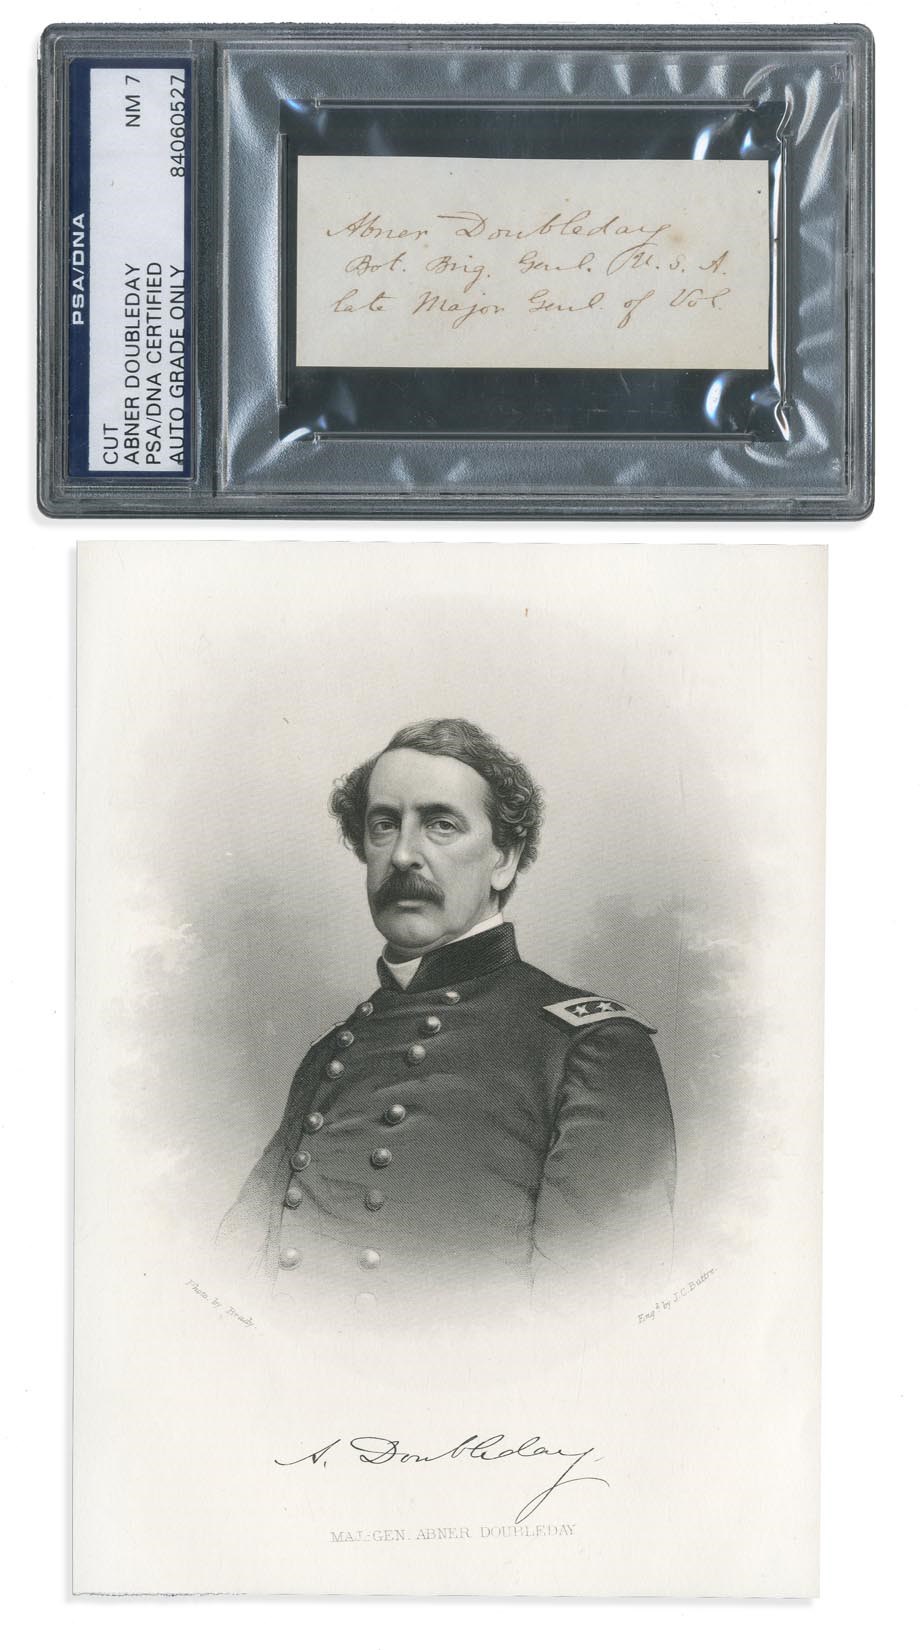 Baseball Autographs - Abner Doubleday Autograph PSA NM 7 with Engraving